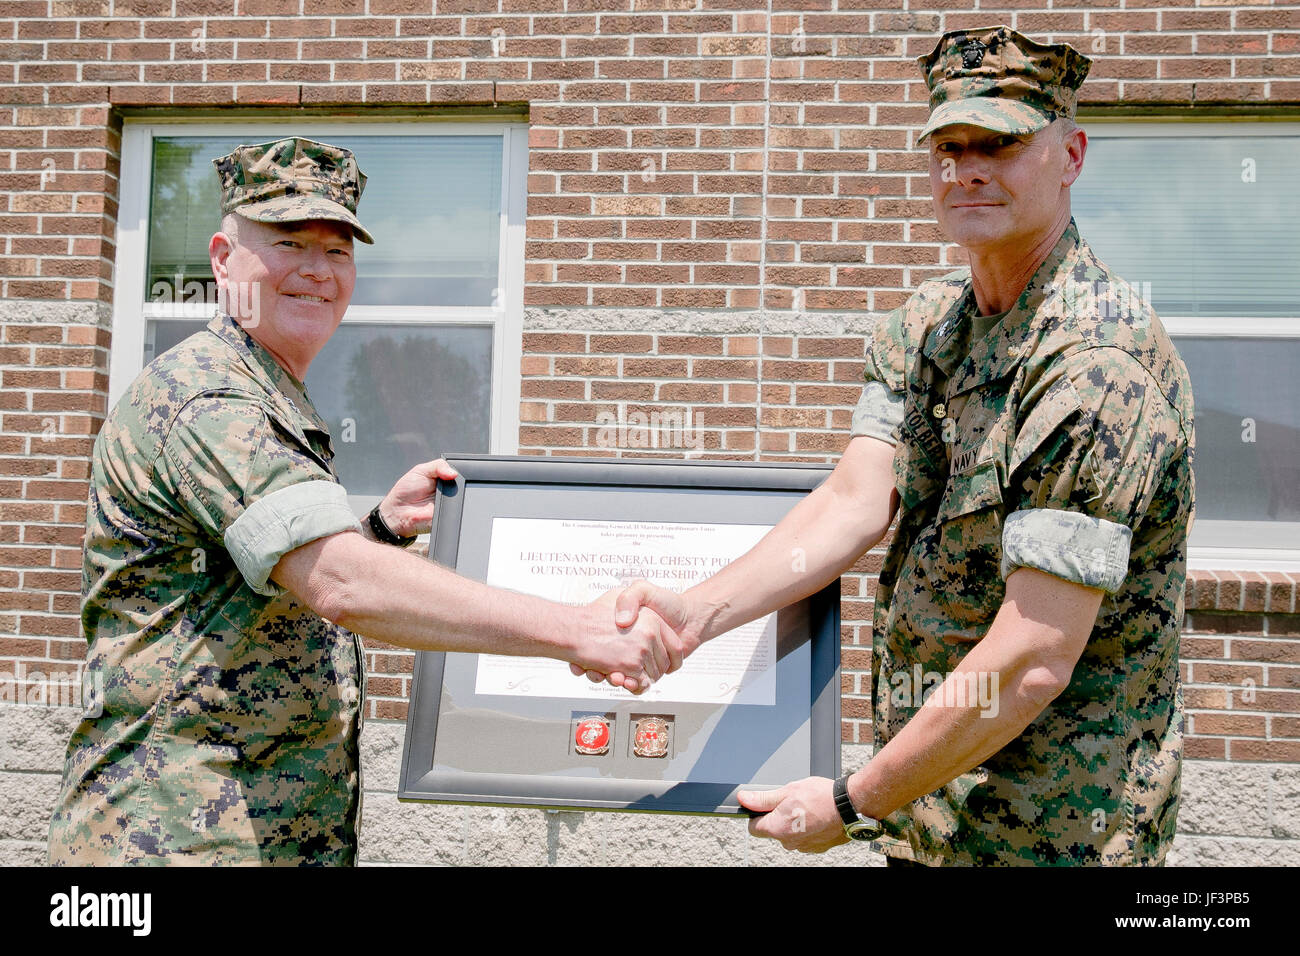 U.S. Marine Corps Maj. Gen. W. Lee Miller Jr., left, commanding general, II Marine Expeditionary Force (II MEF), shakes hands with U.S. Navy Capt. Brian Tolbert, commanding officer, 2nd Medical Battalion (2d MED BN), II MEF, after the battalion received the “Lt. Gen. Chesty Puller” Outstanding Leadership Award on Camp Lejeune, N.C., May 10, 2017. The battalion earned this award for exceptional professional ability, superior performance and dedication to supporting the mission of the II MEF. (U.S. Marine Corps photo by Sgt. Kelly L. Street) Stock Photo